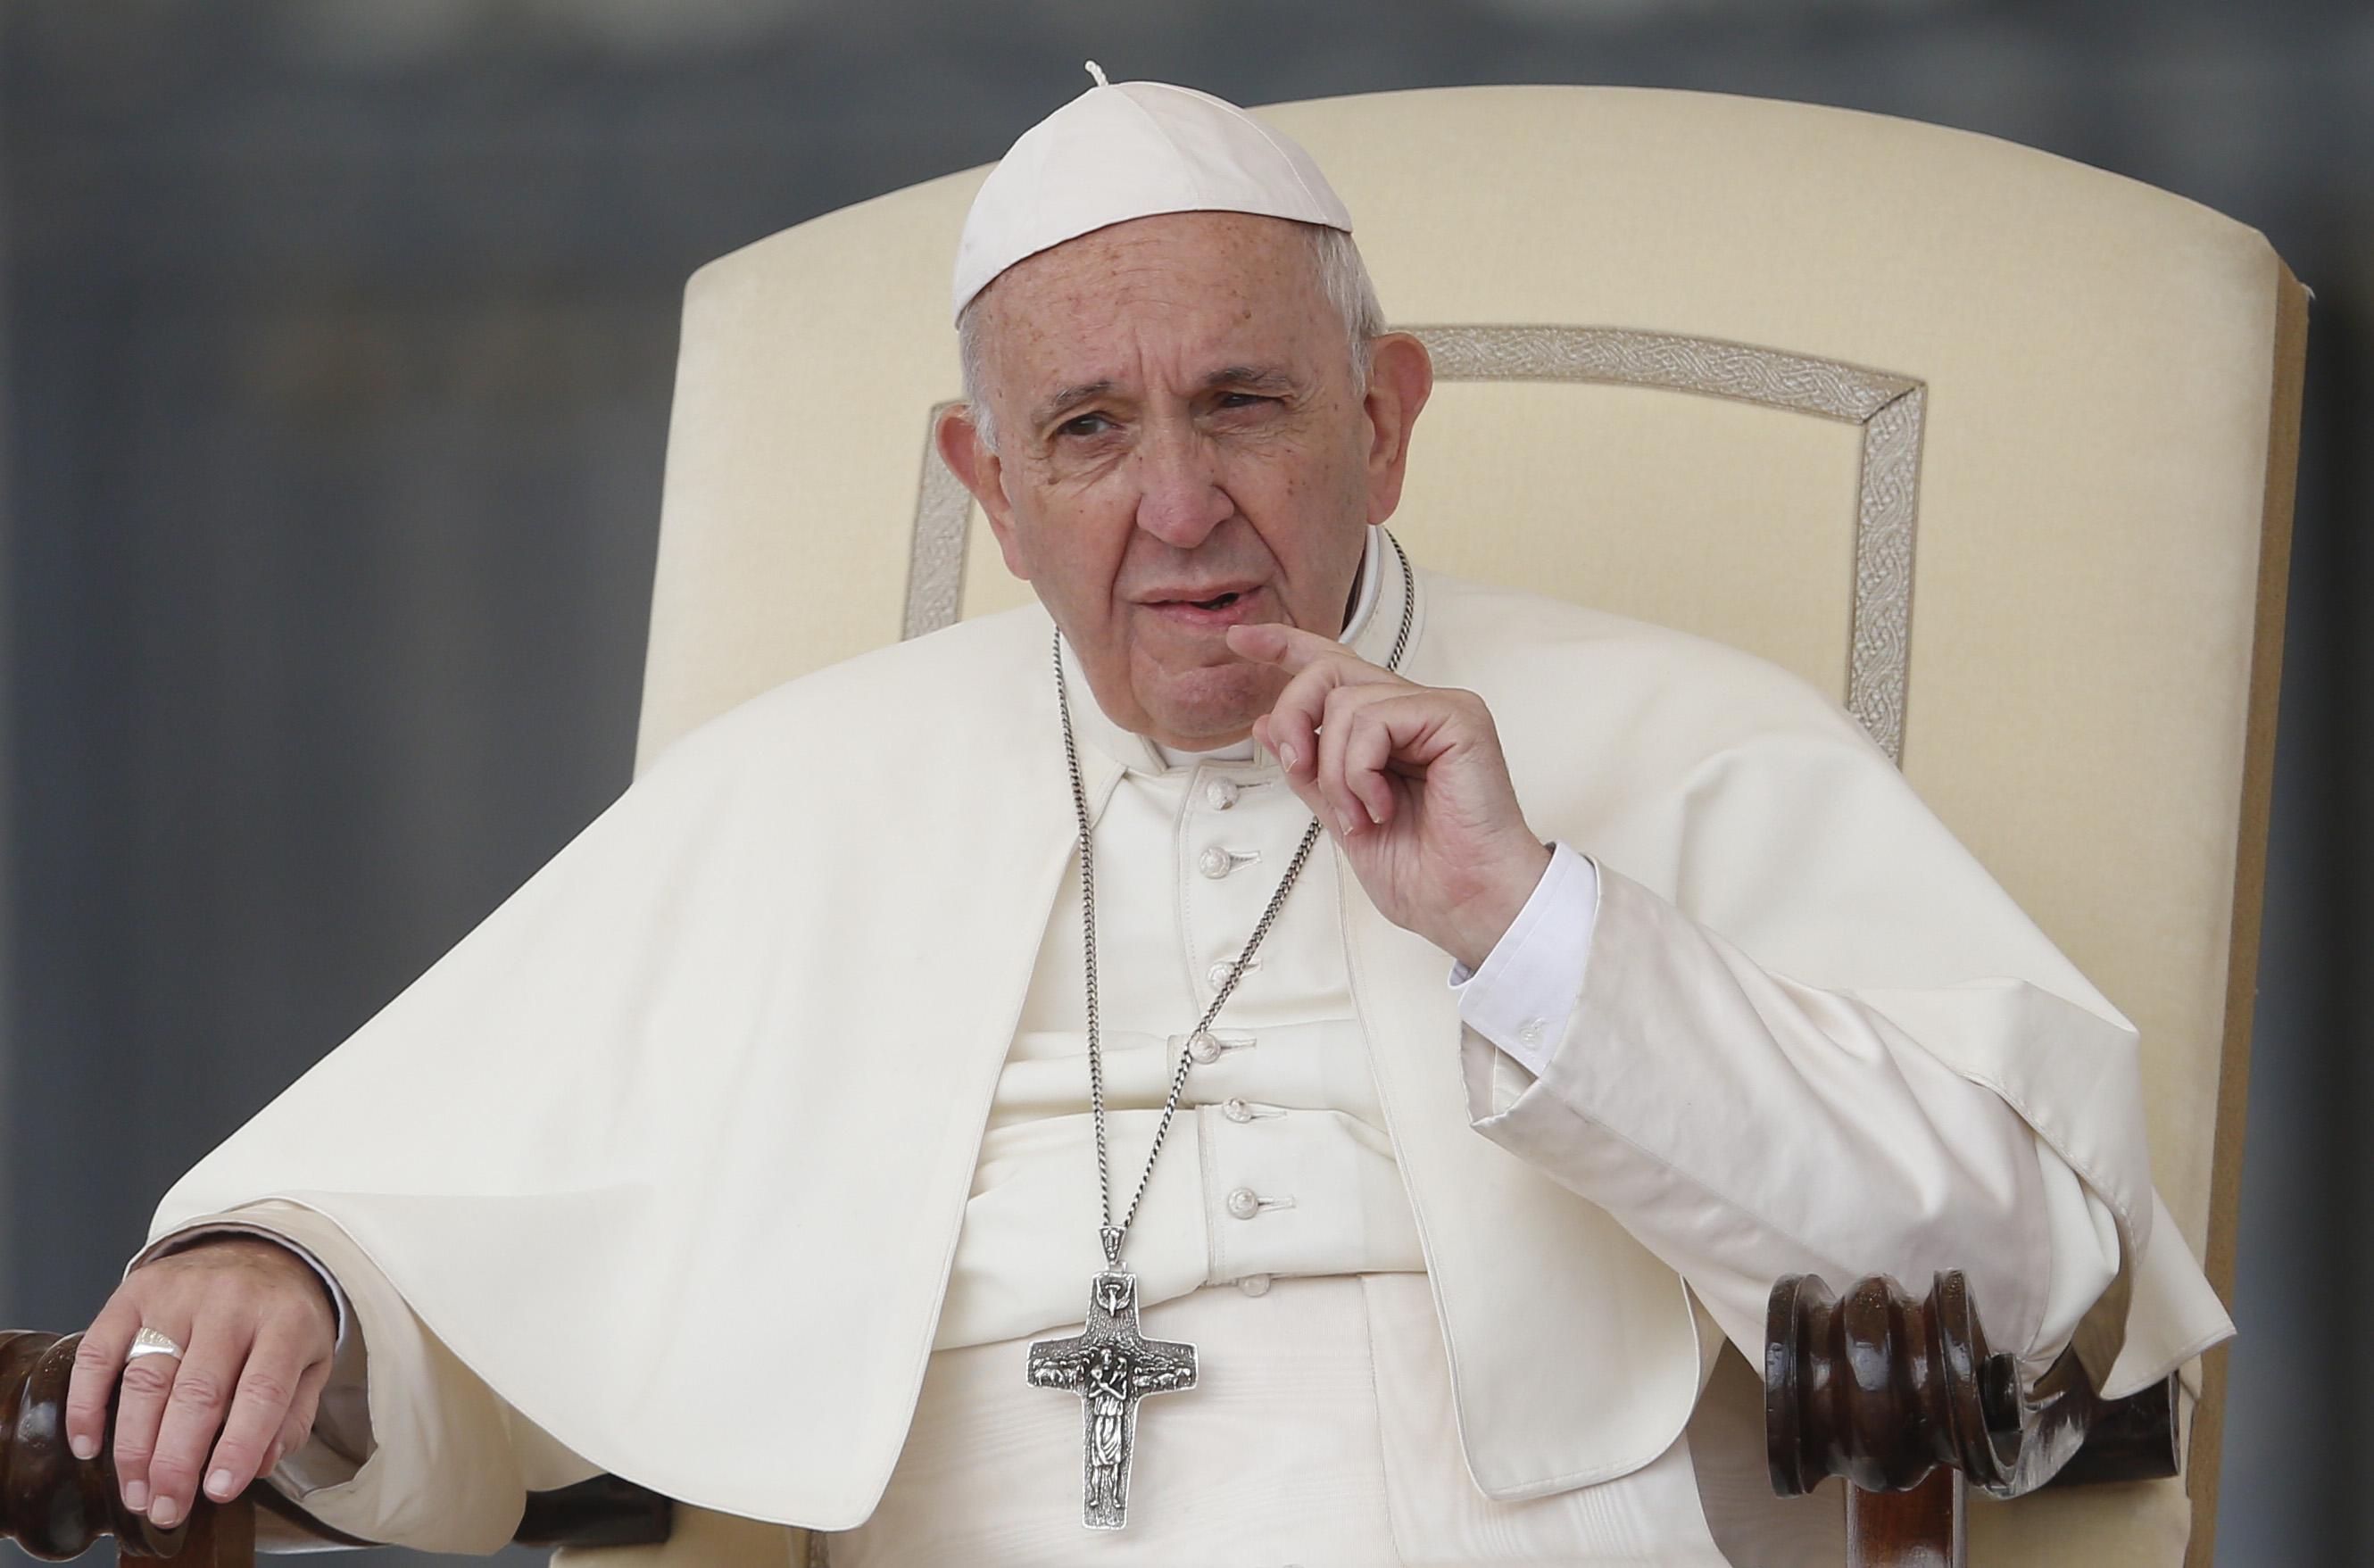 Pope Francis: 'I believe the Lord wants change in the Church.'